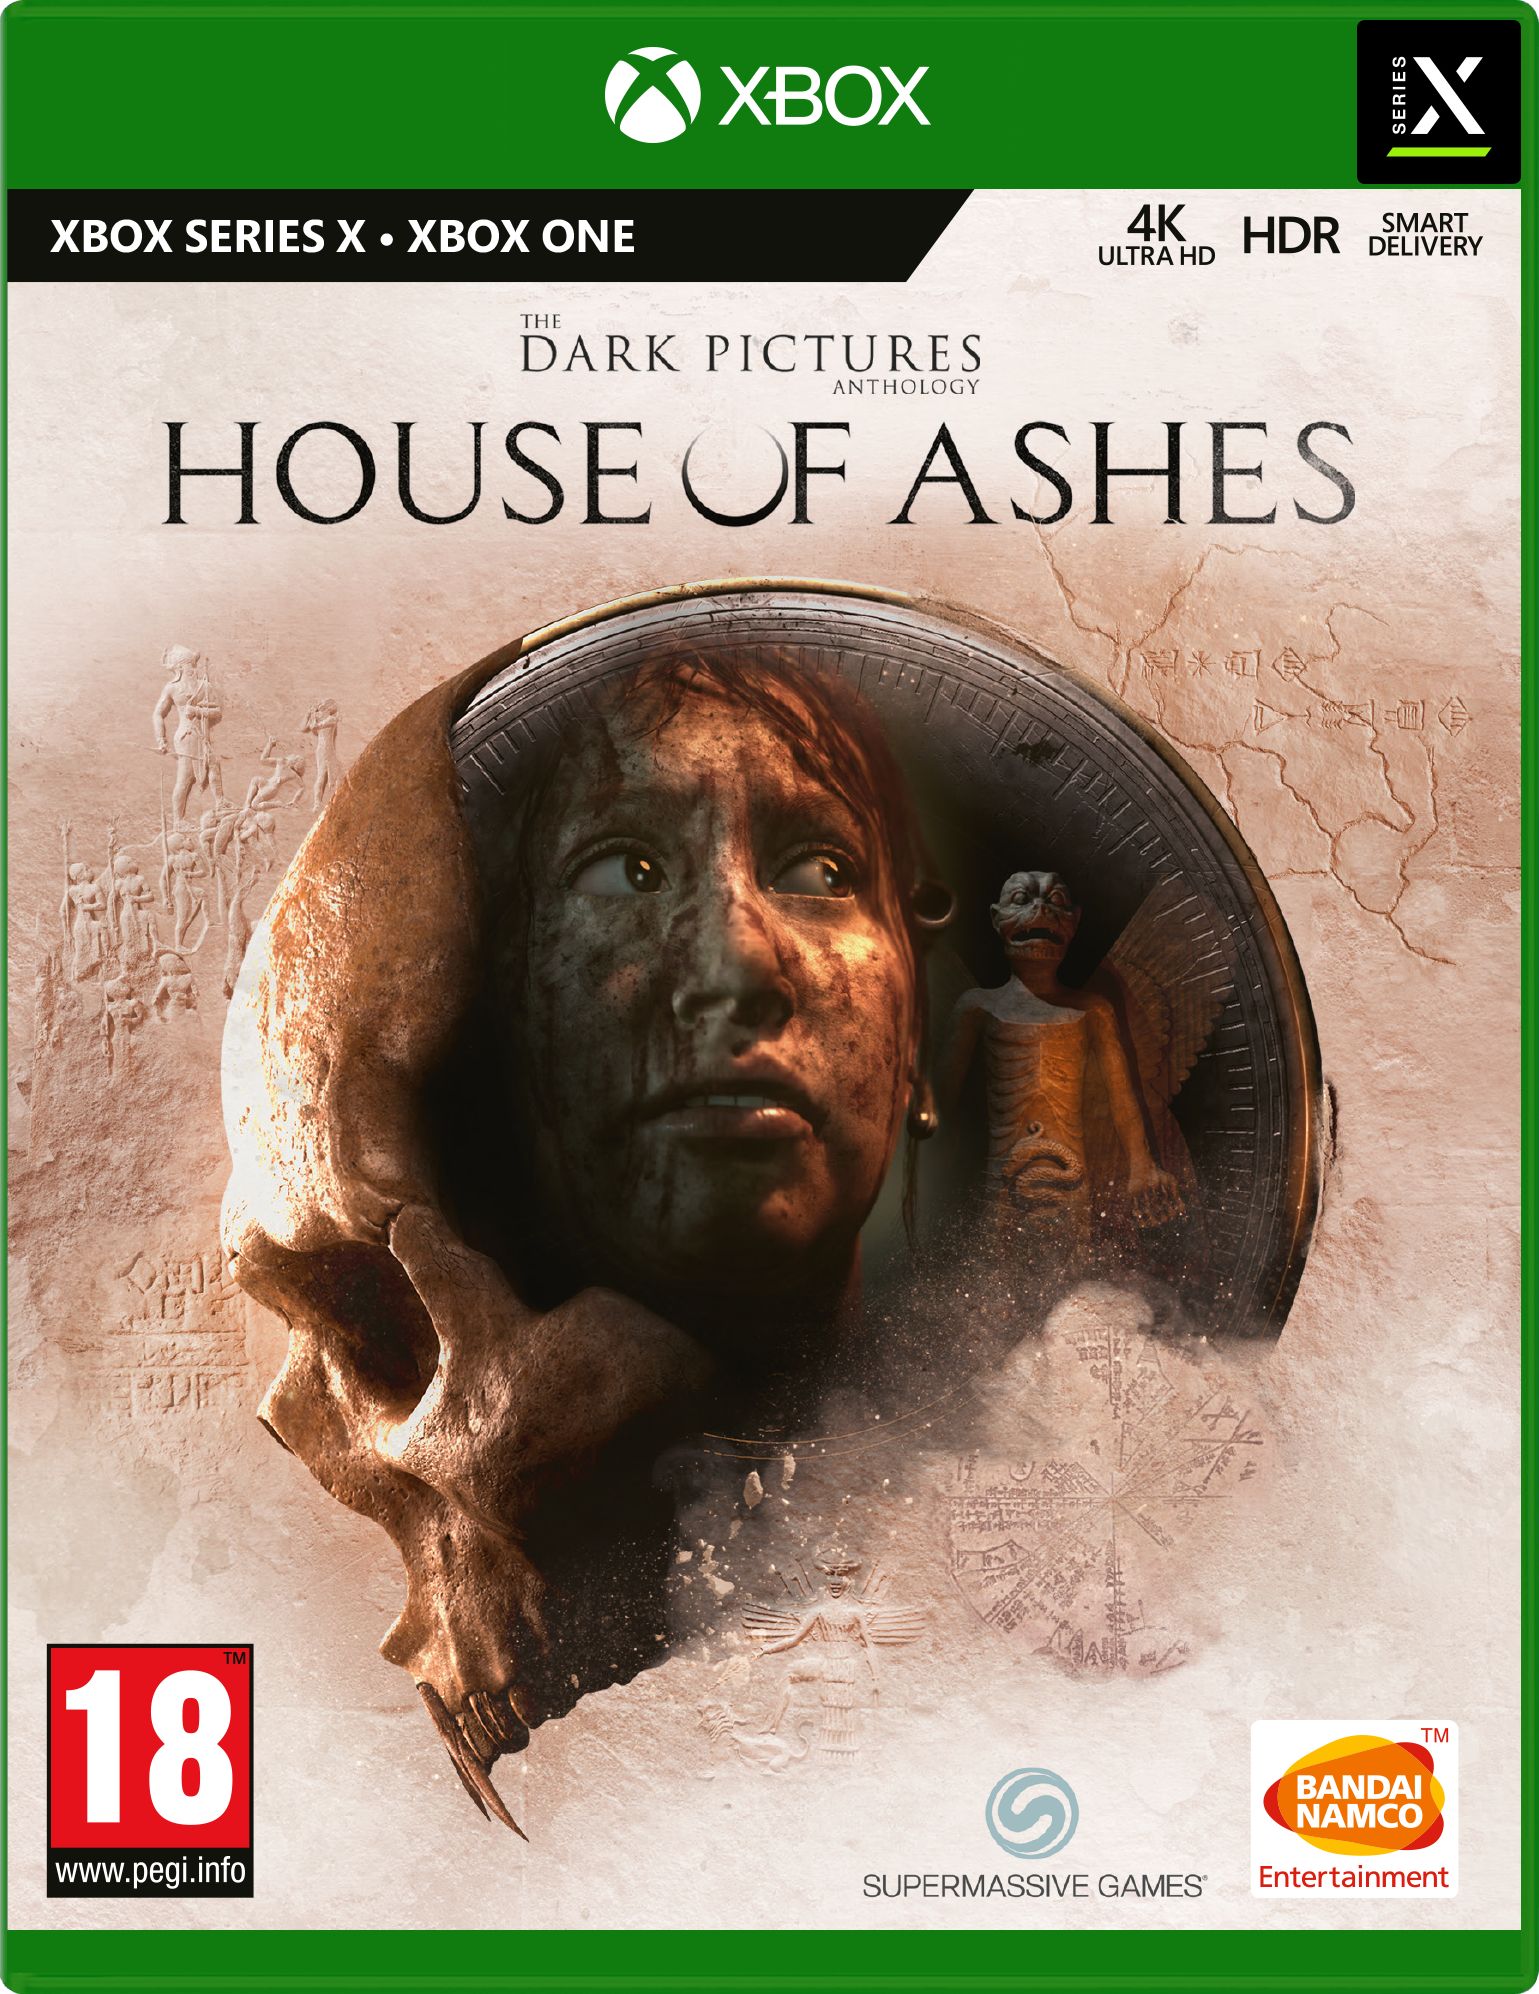 The Dark Pictures – House of Ashes Xbox Series X • Xbox One